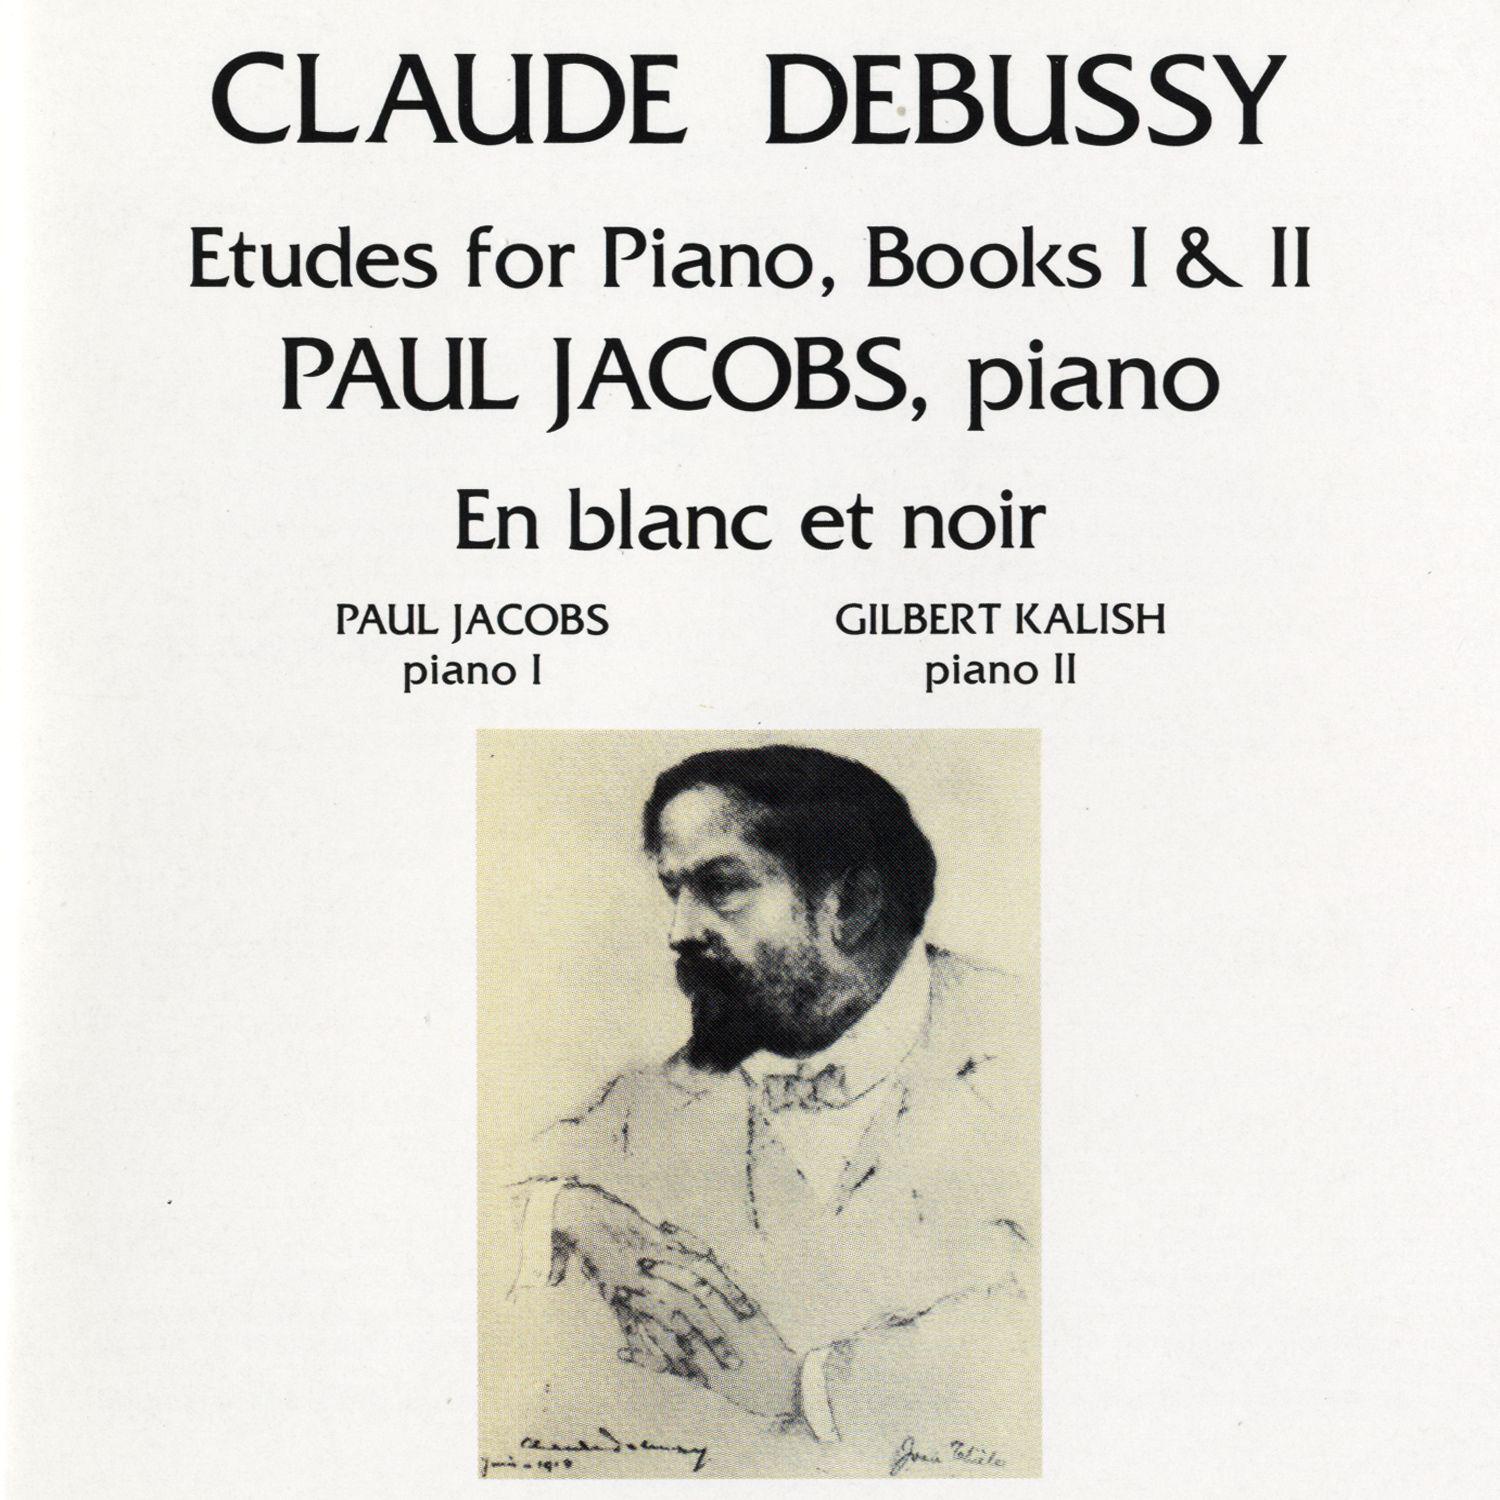 Debussy: Etudes for Piano, Book I; Pour les octaves